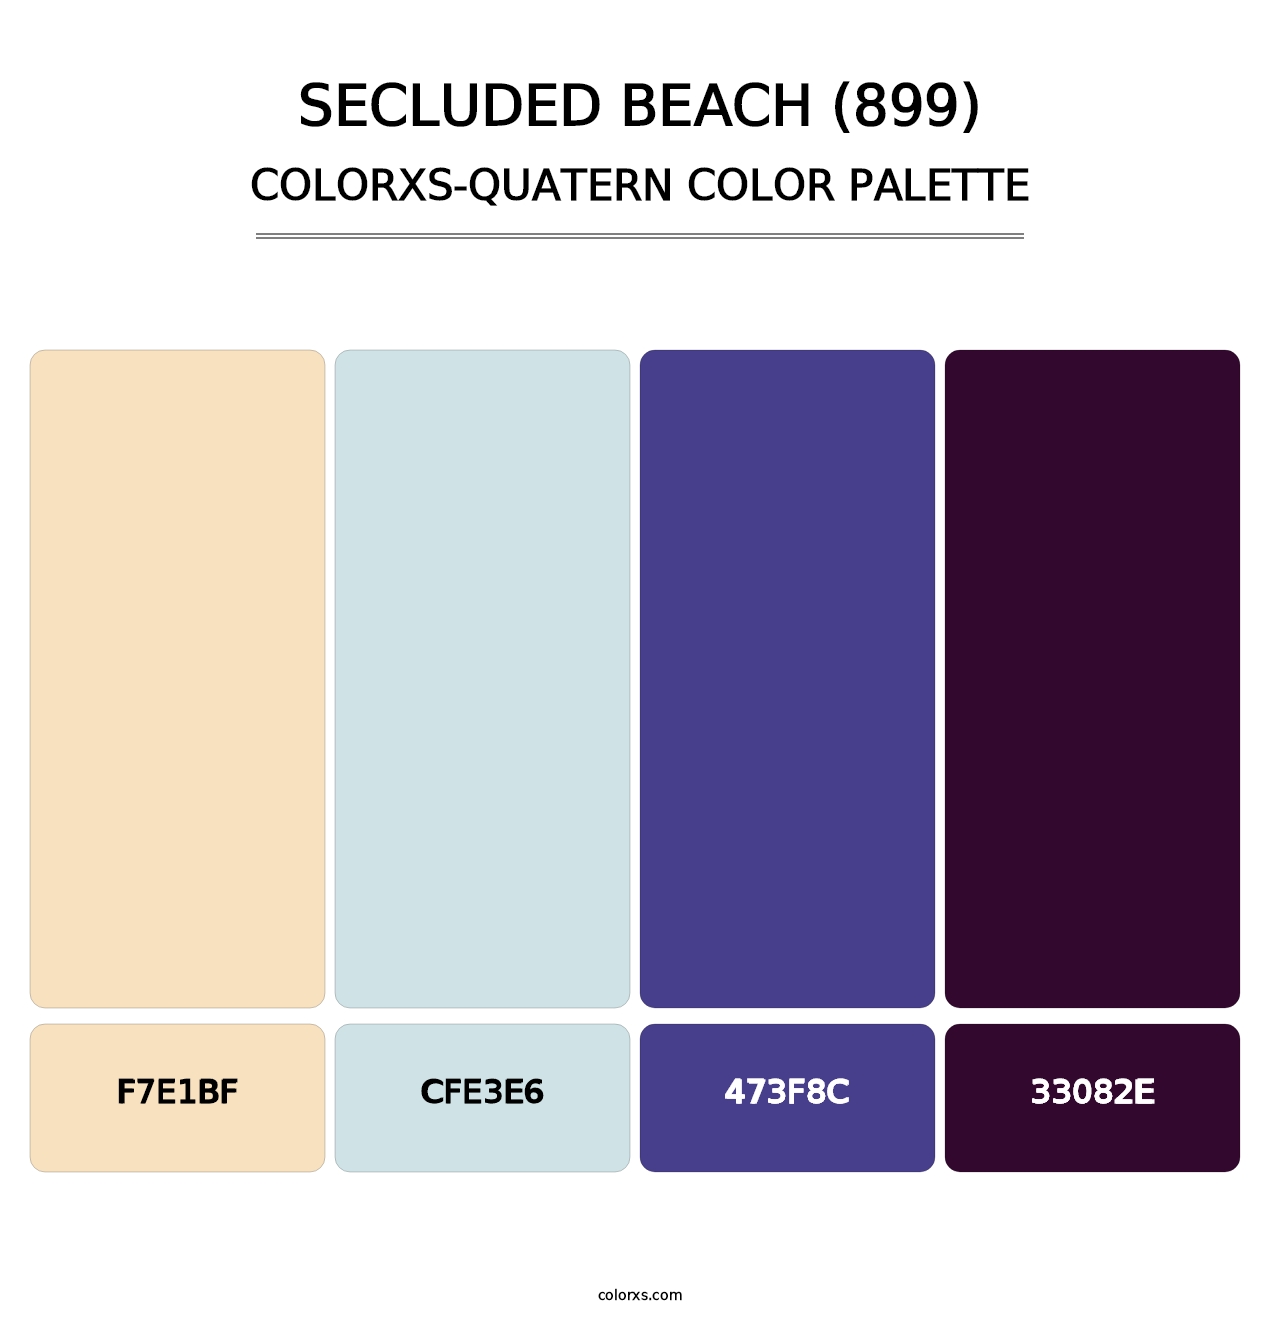 Secluded Beach (899) - Colorxs Quatern Palette